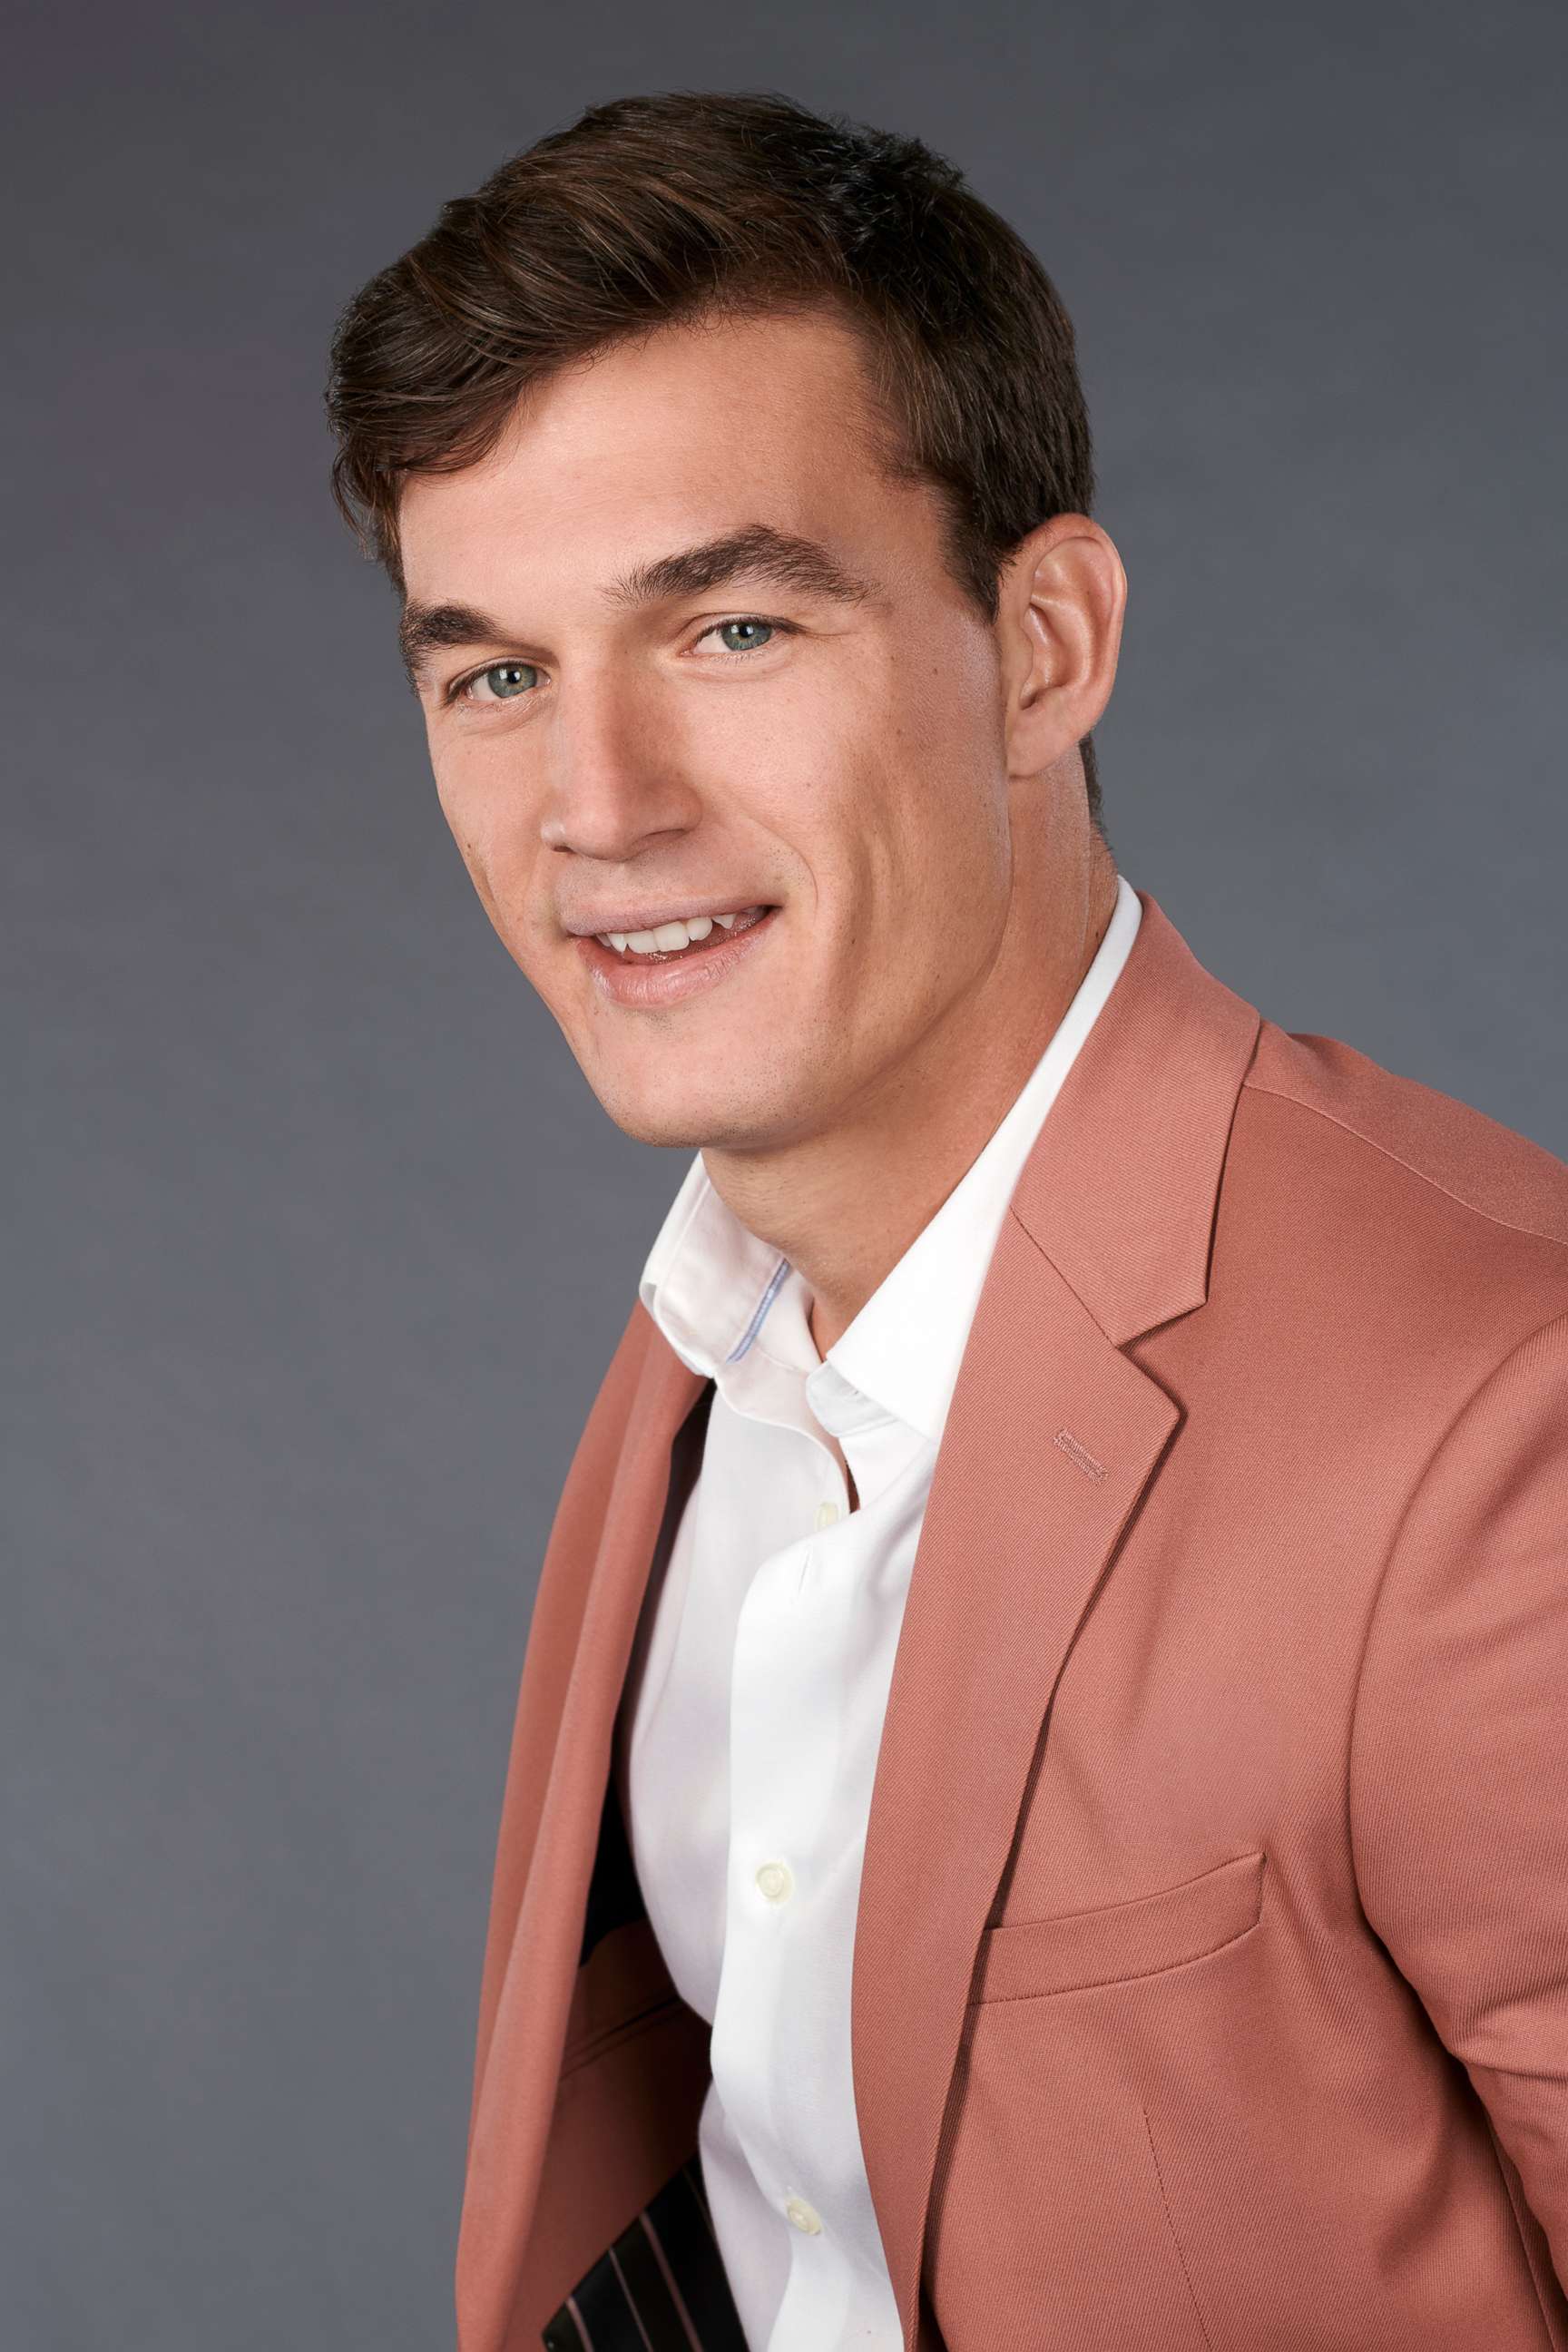 PHOTO: Tyler C on "The Bachelorette" is seen here in this undated file photo.